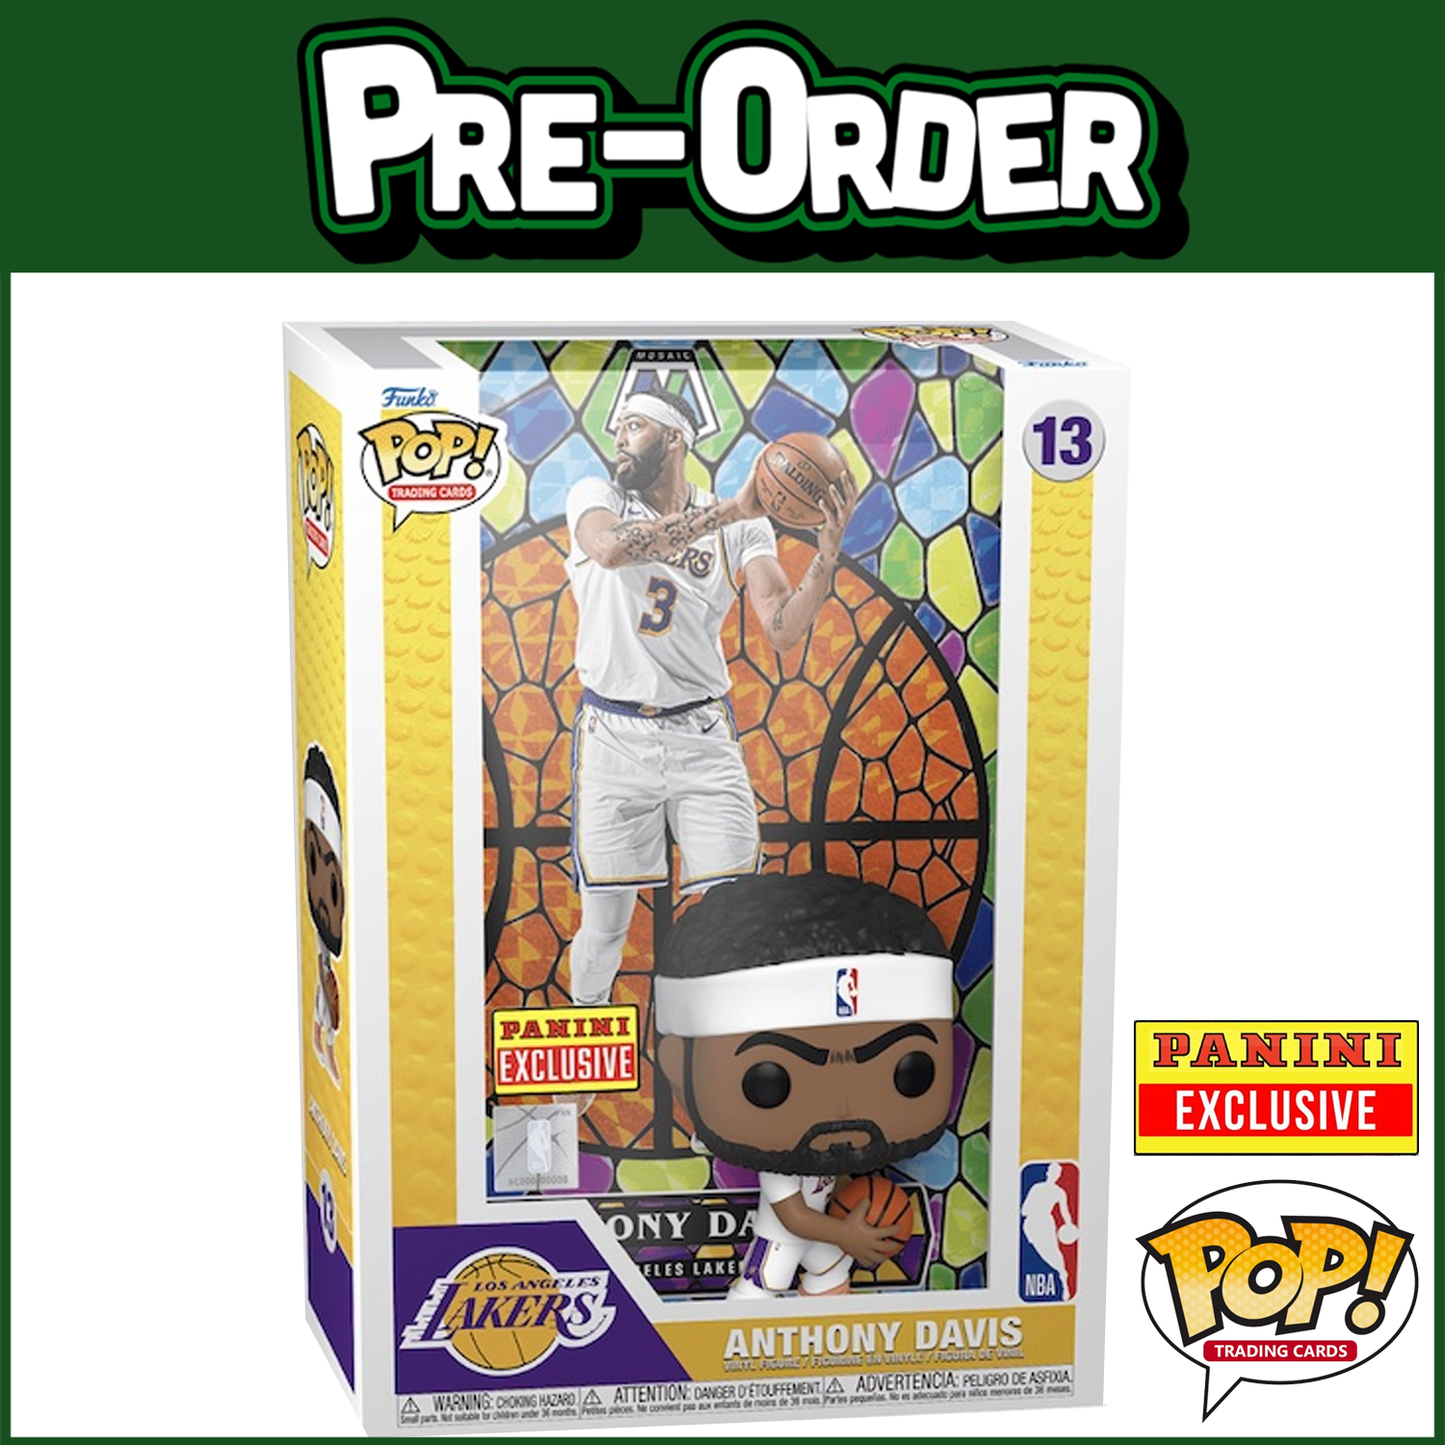 (PRE-ORDER) Funko POP! Trading Cards: Anthony Davis - Mosaic Prism #13 (Panini Exclusive)